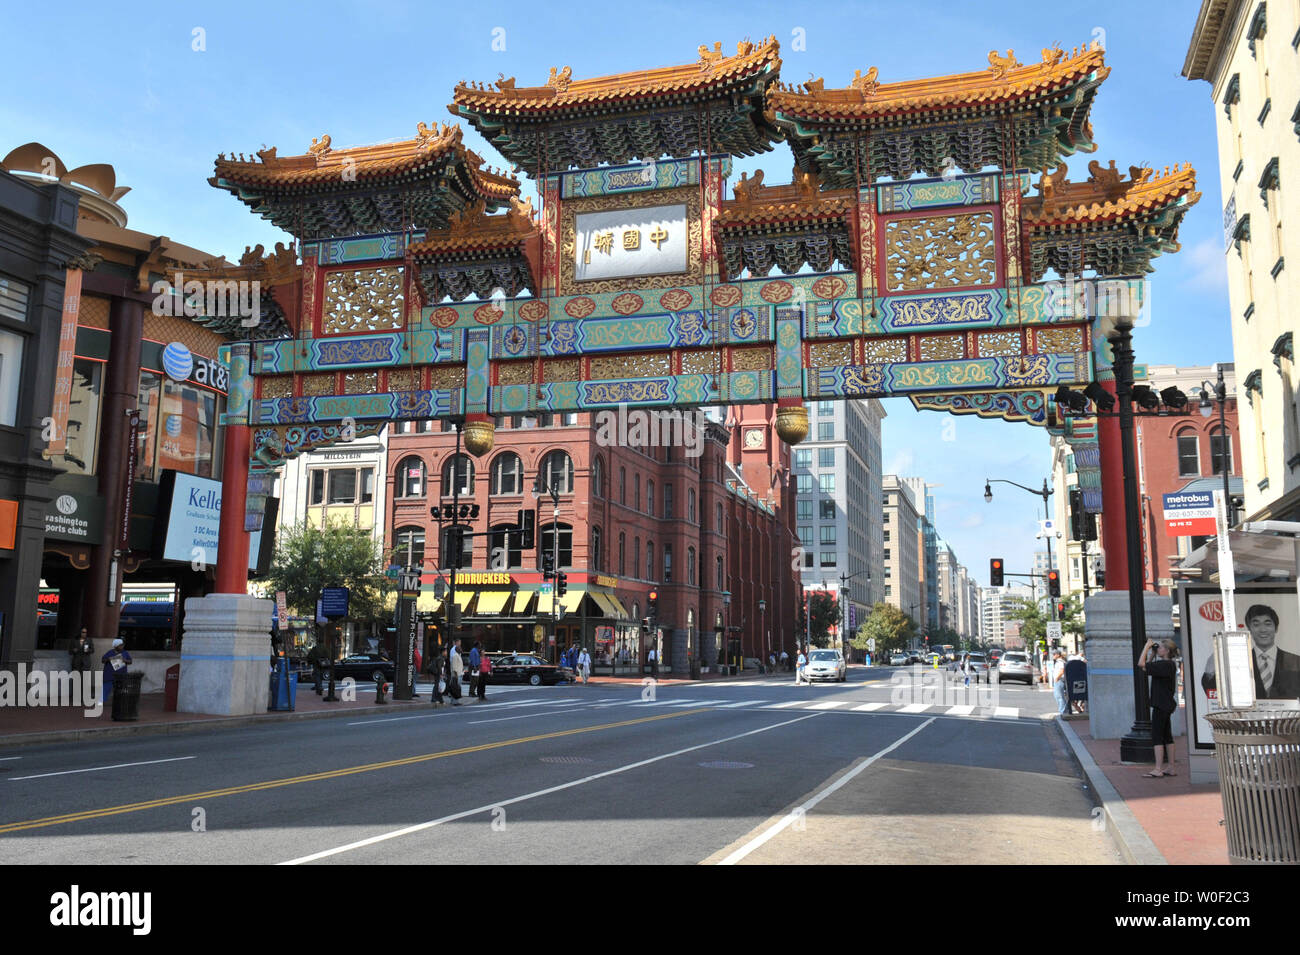 The newly renovated Friendship Arch is seen in Chinatown, Washington, D.C., September 21, 2009. UPI/Kevin Dietsch Stock Photo